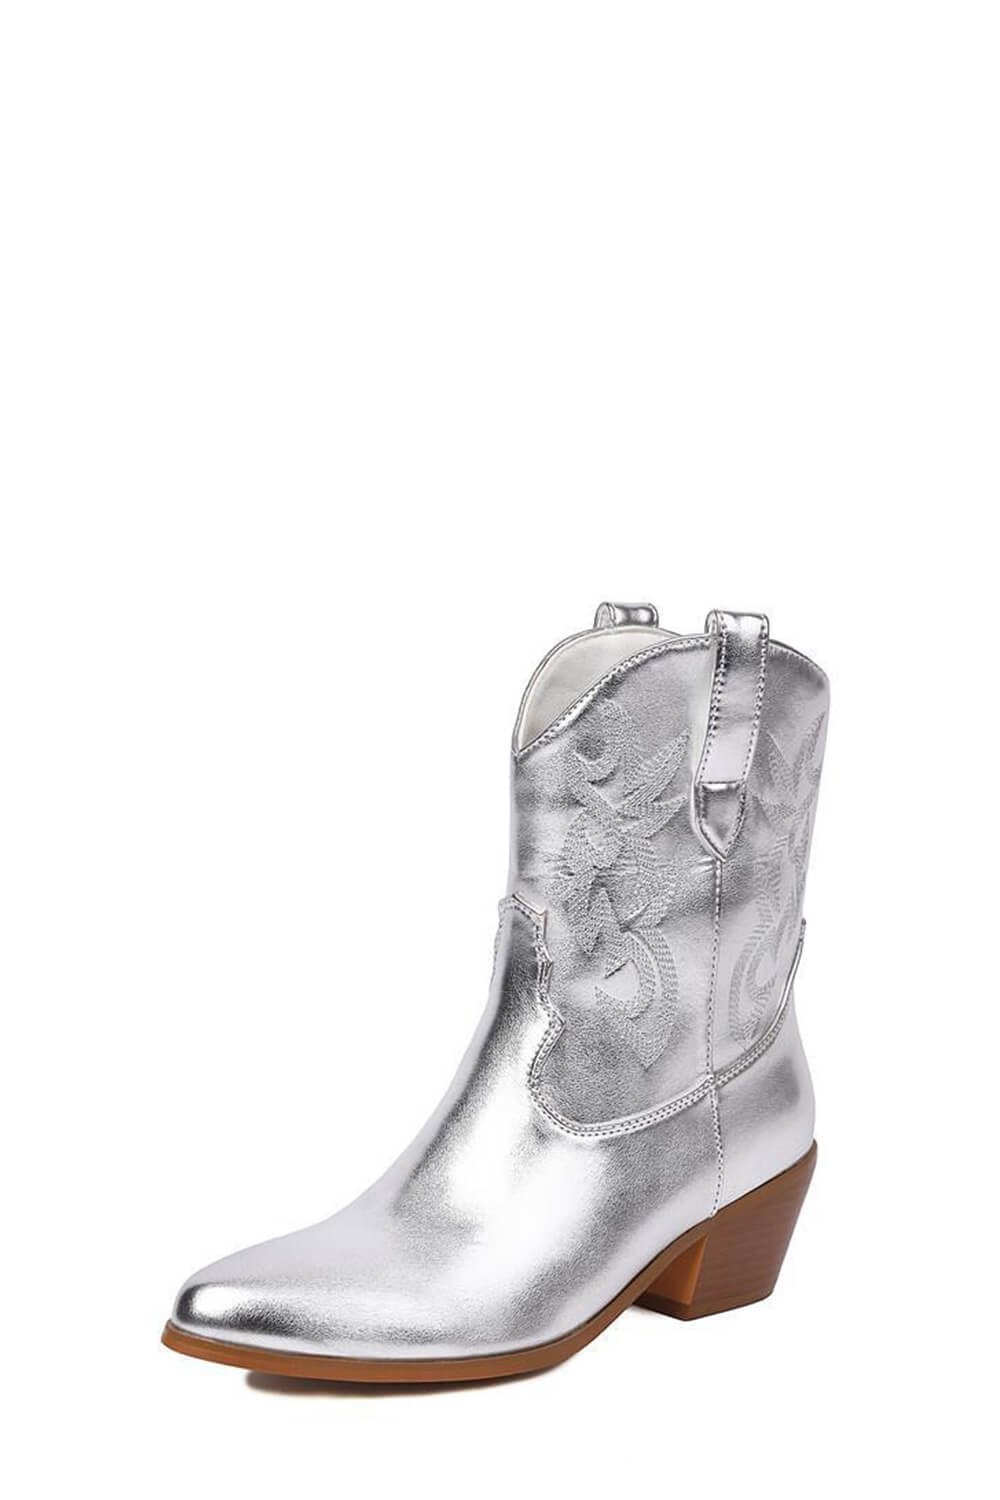 Metallic Western Cowboy Pointed Toe Block Heeled Ankle Boots - Silver